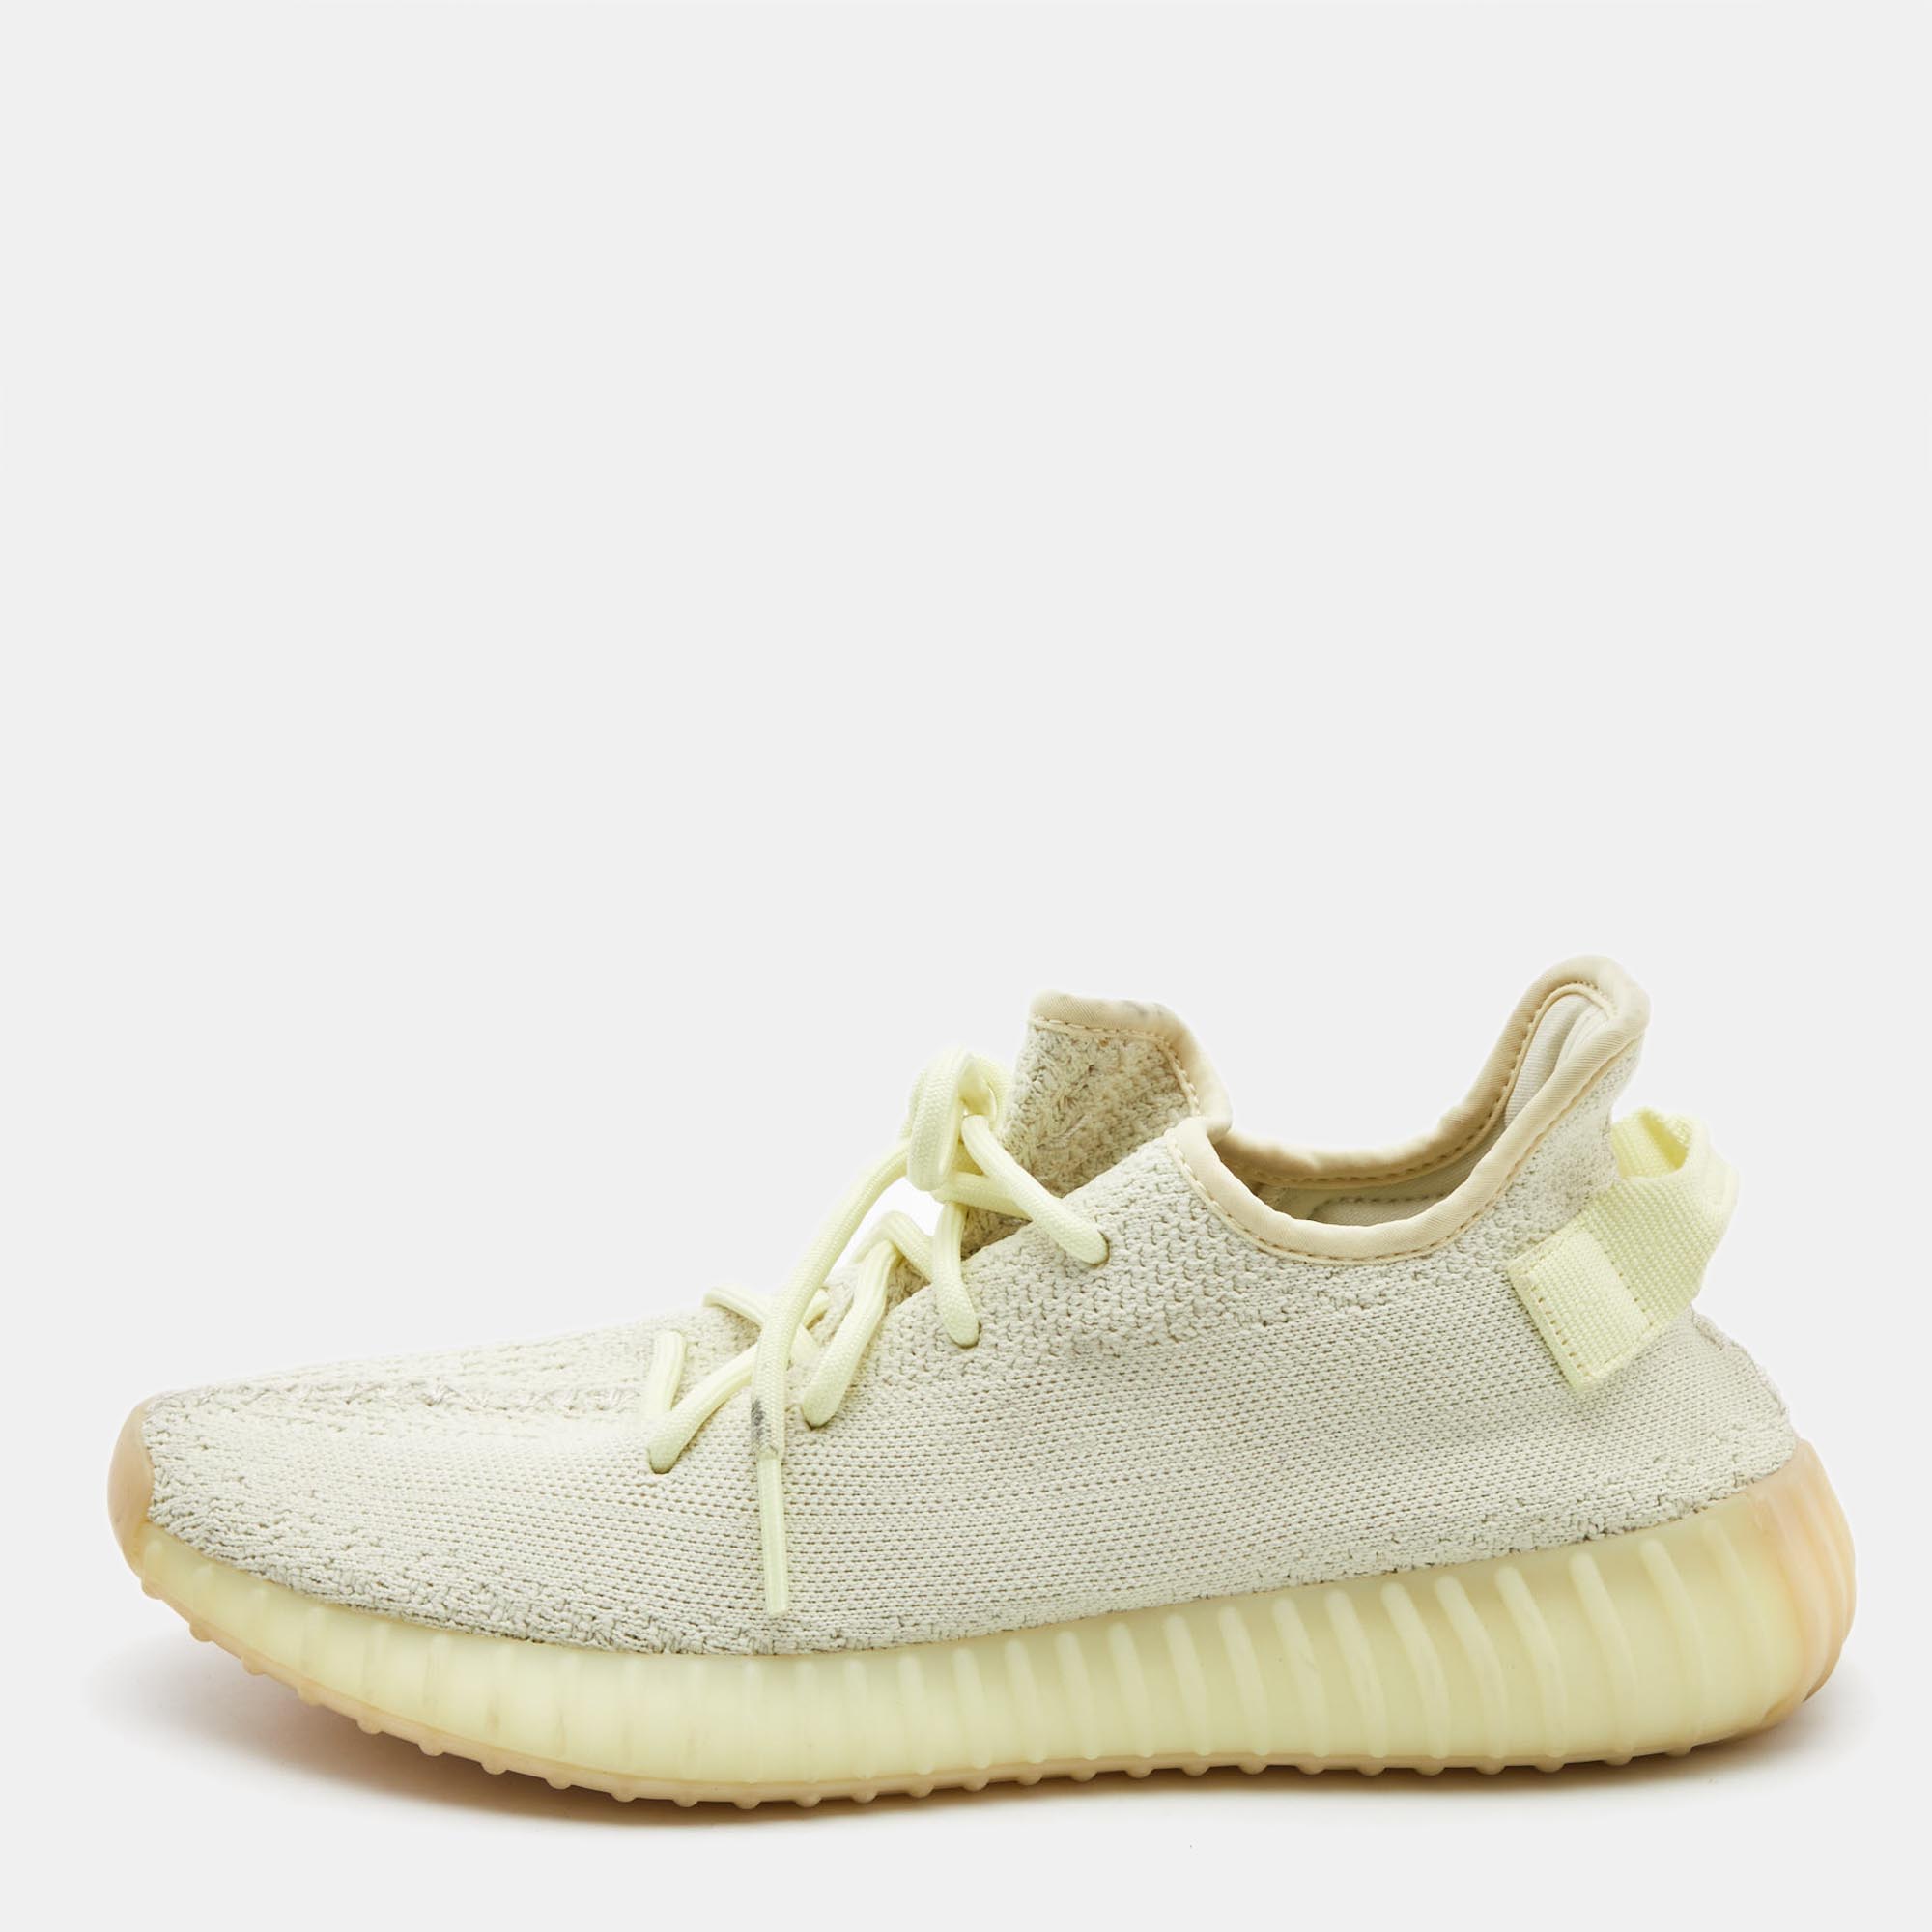 Pre-owned Yeezy X Adidas Light Yellow Knit Fabric Boost 350 V2 Butter Trainers Size 41 1/3